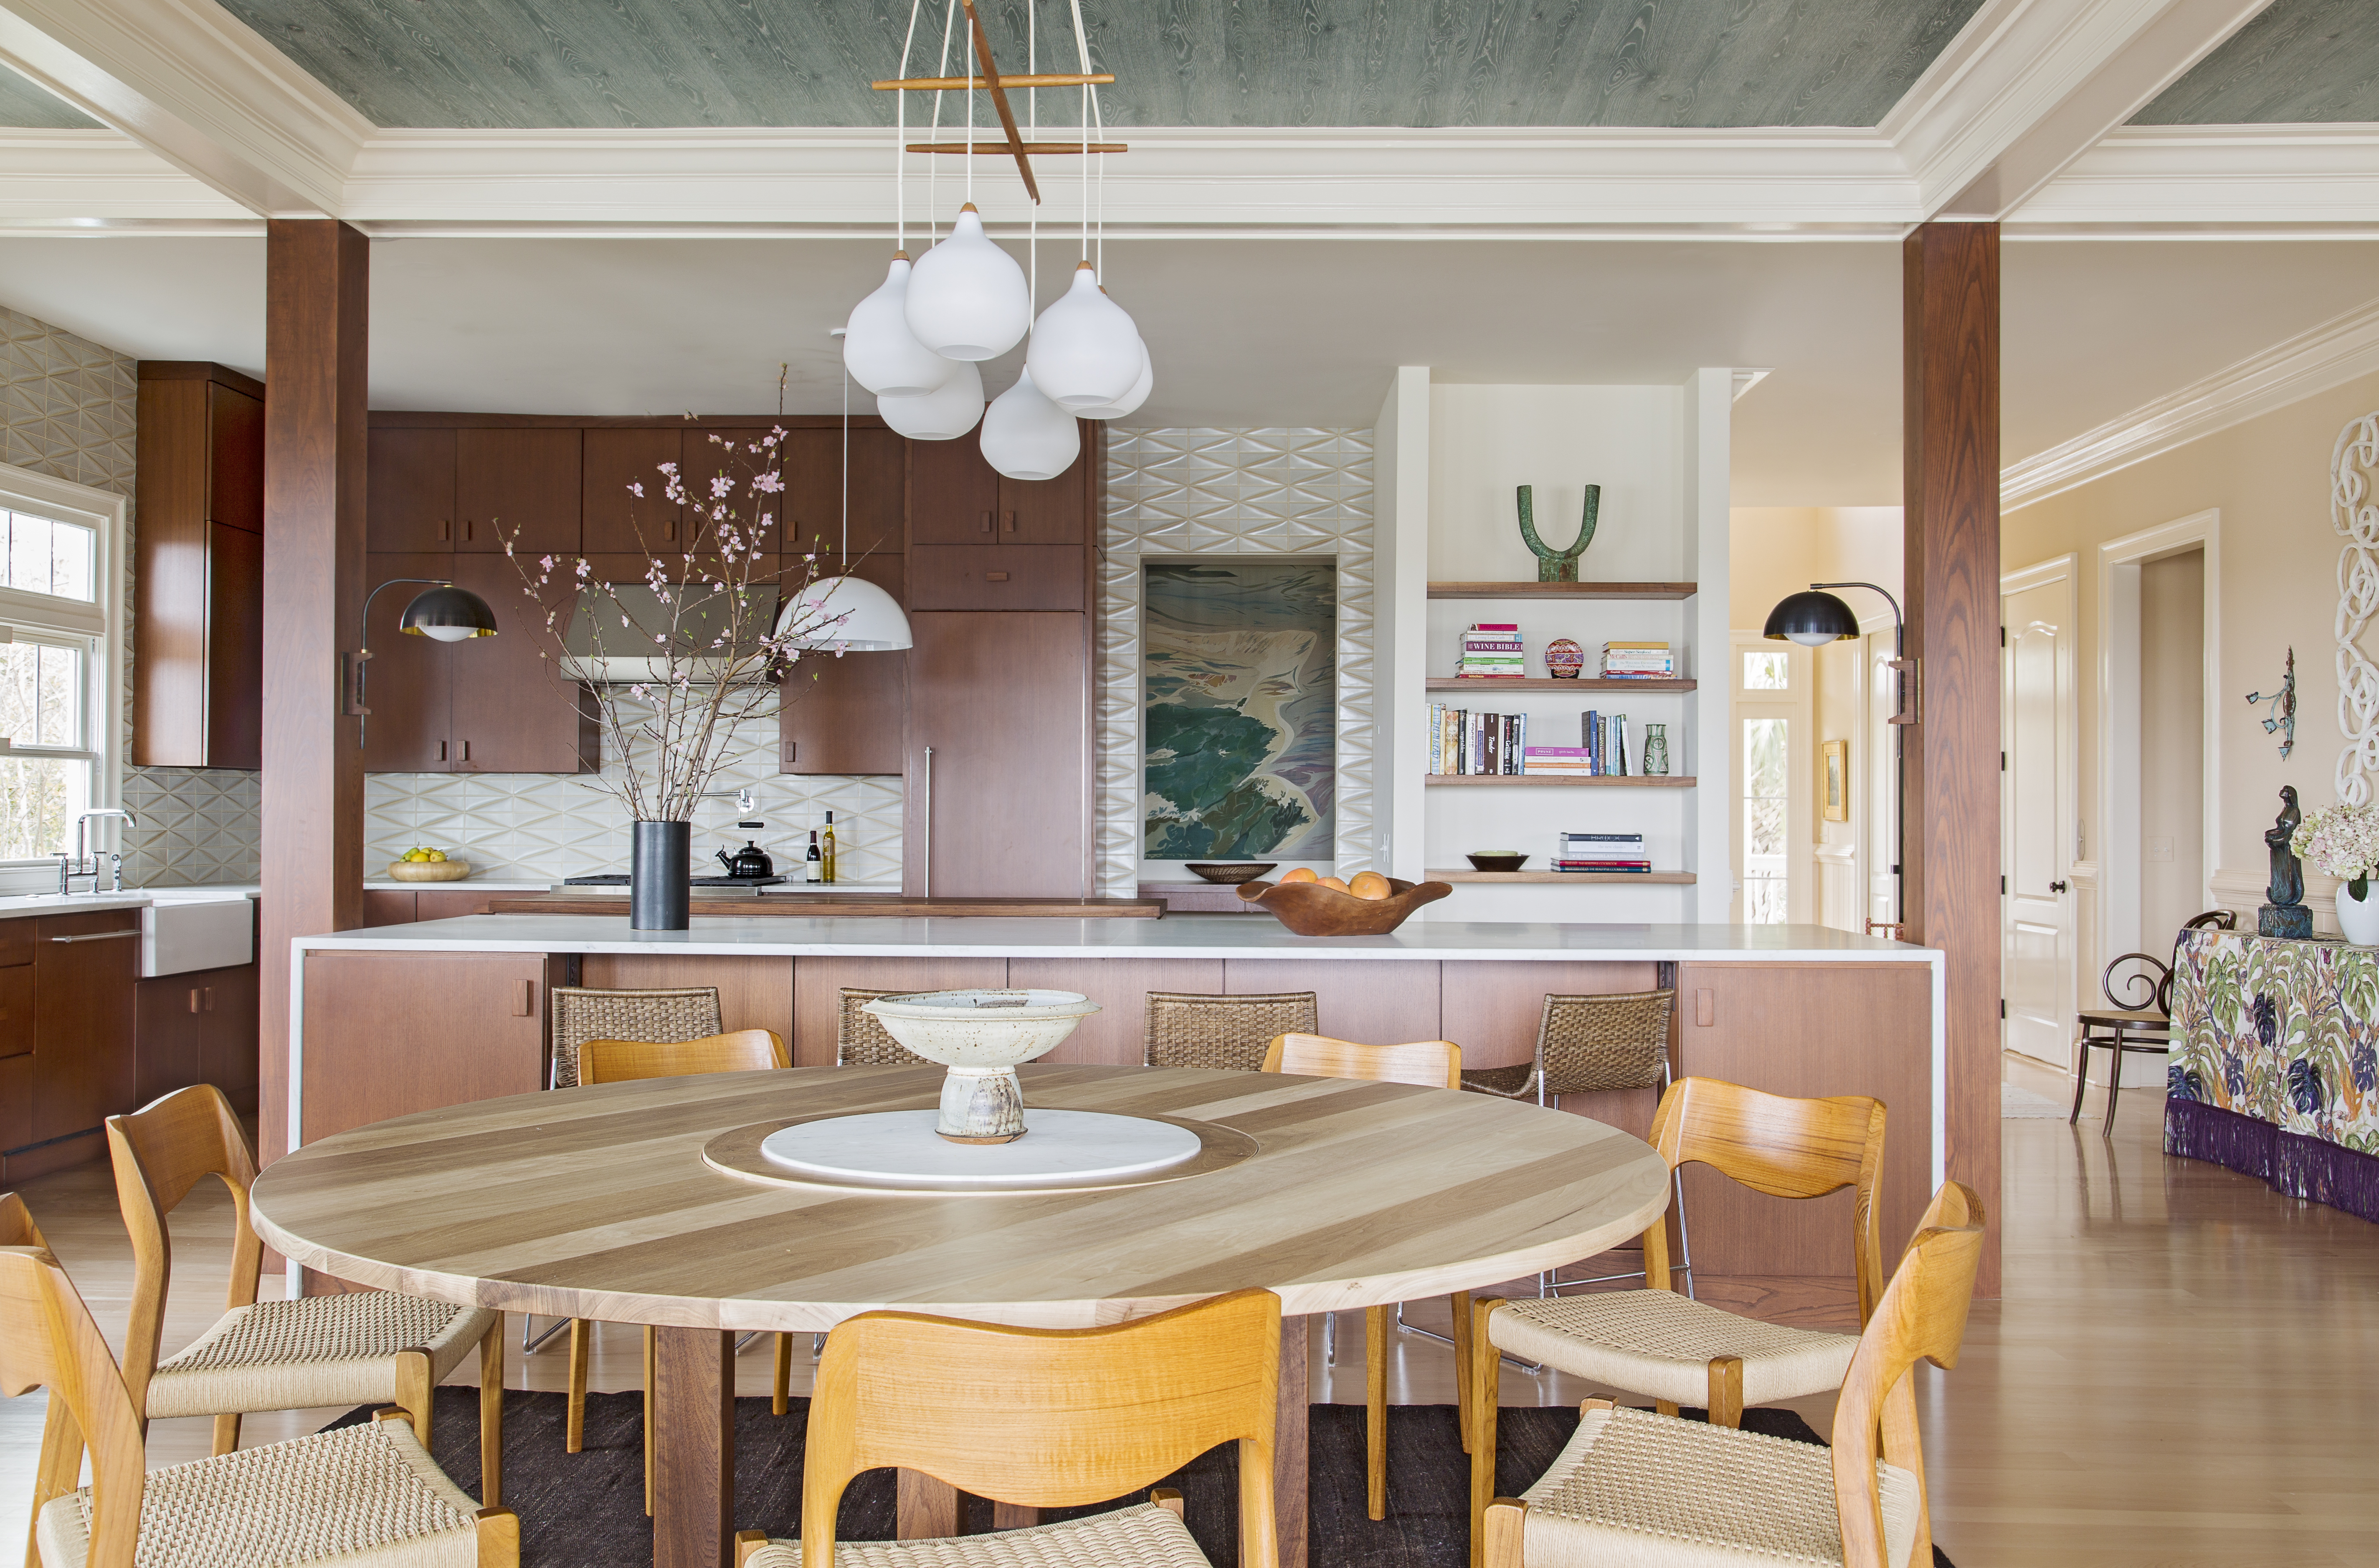 A full kitchen redo was not initially in the cards, but Hranowsky was thrilled when she got the all clear to create a sleeker, more functional space, featuring Ann Sacks glazed geometric tiles and a Mary Edna Fraser batik showcased from the pantry.